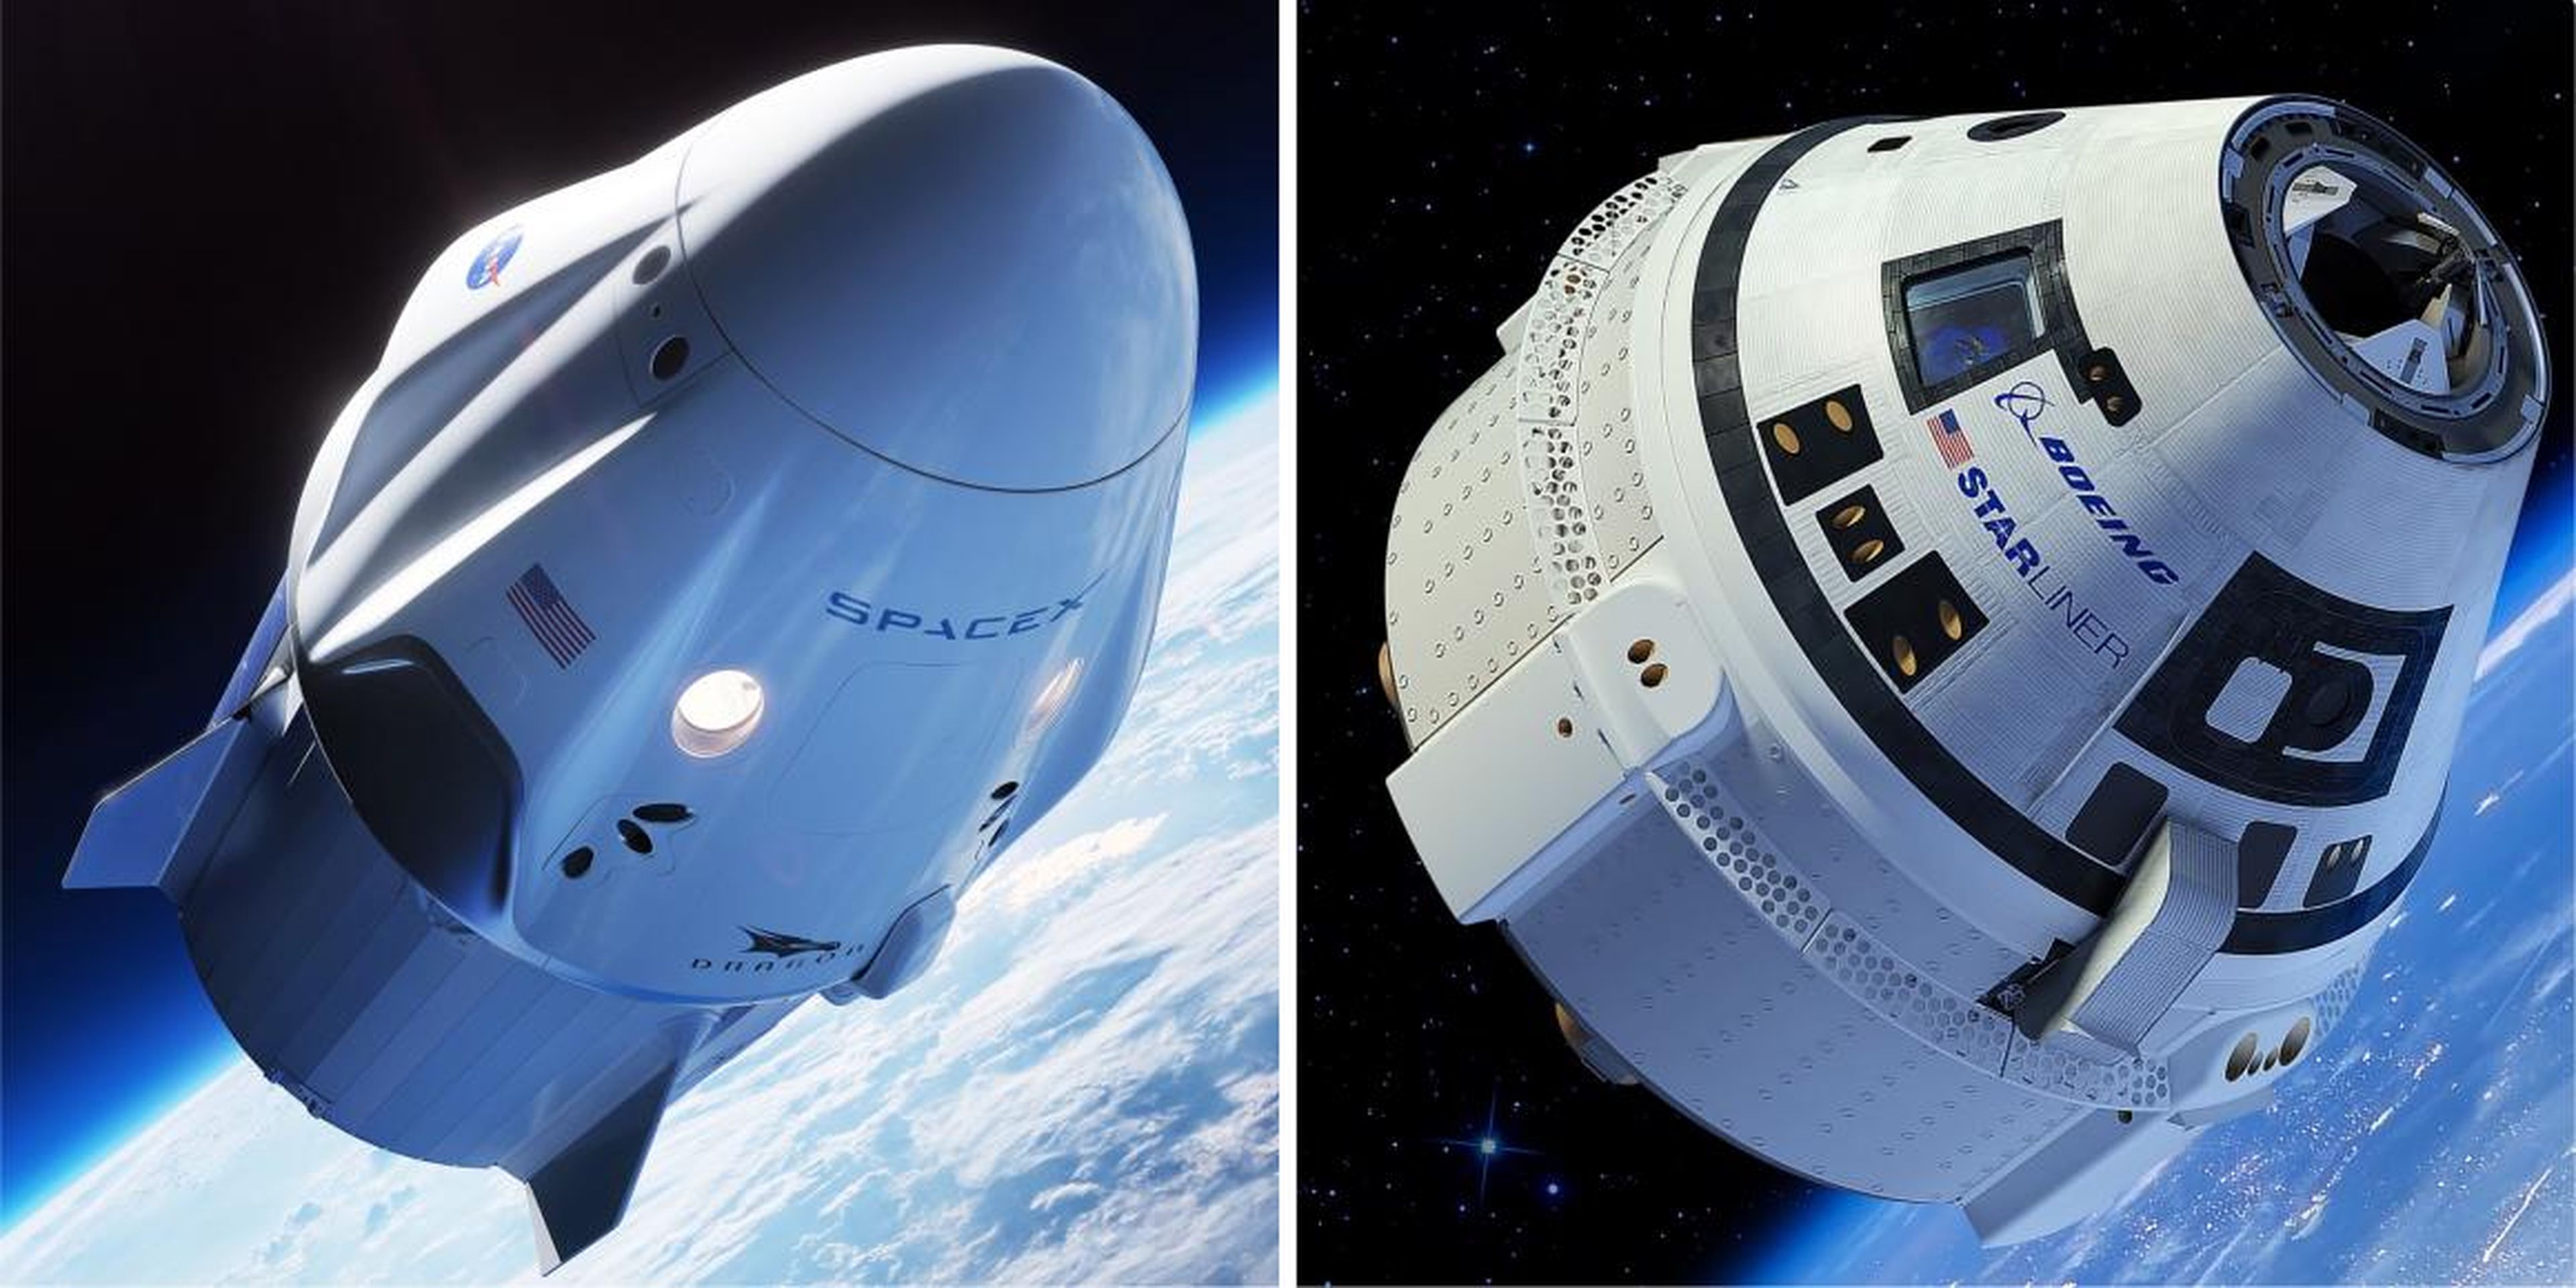 An illustration of SpaceX's Crew Dragon spacecraft, left, and Boeing's CST-100 Starliner spacecraft.